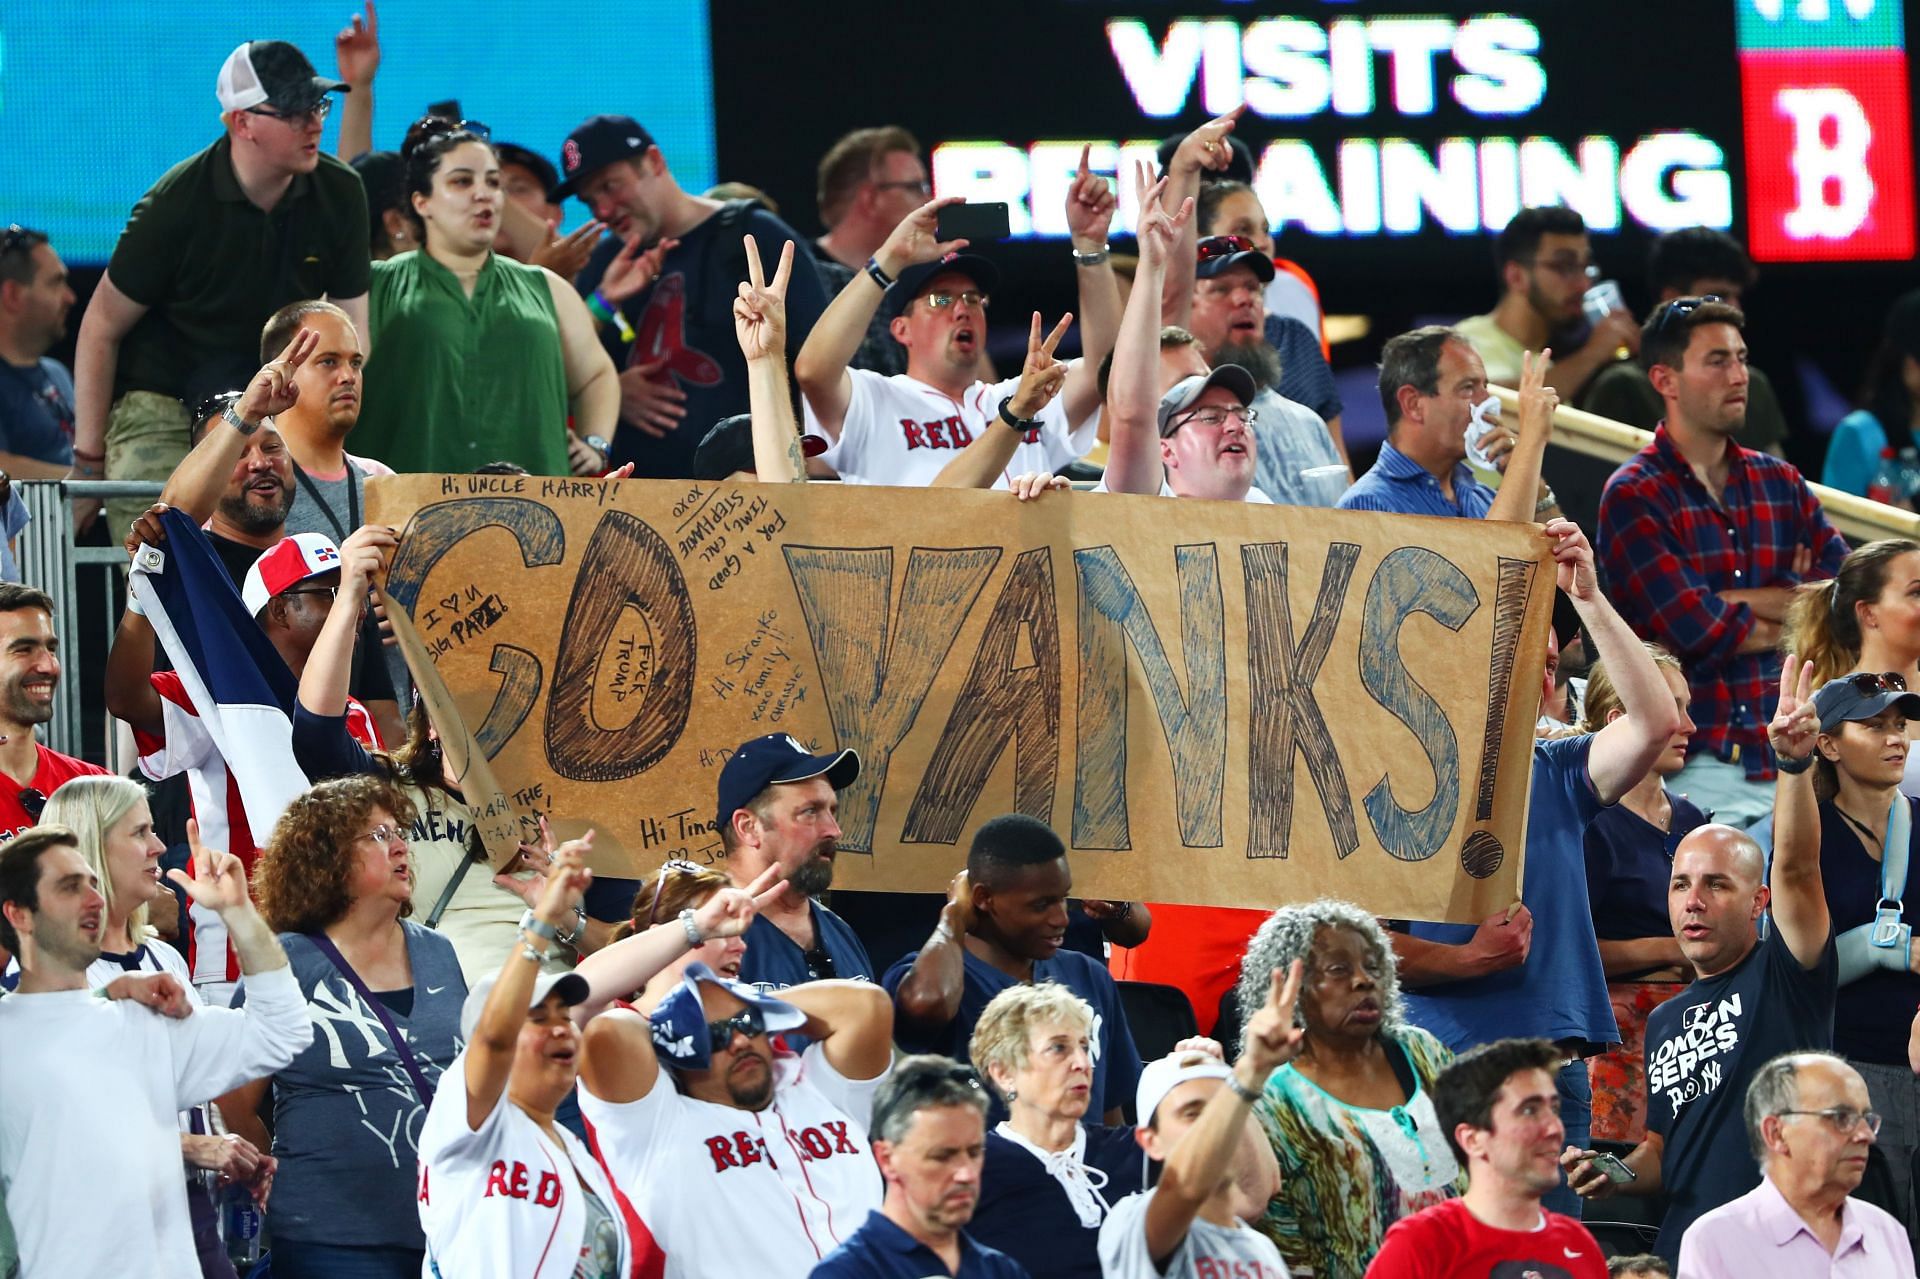 Yankees fans are relentless with the release of this story.